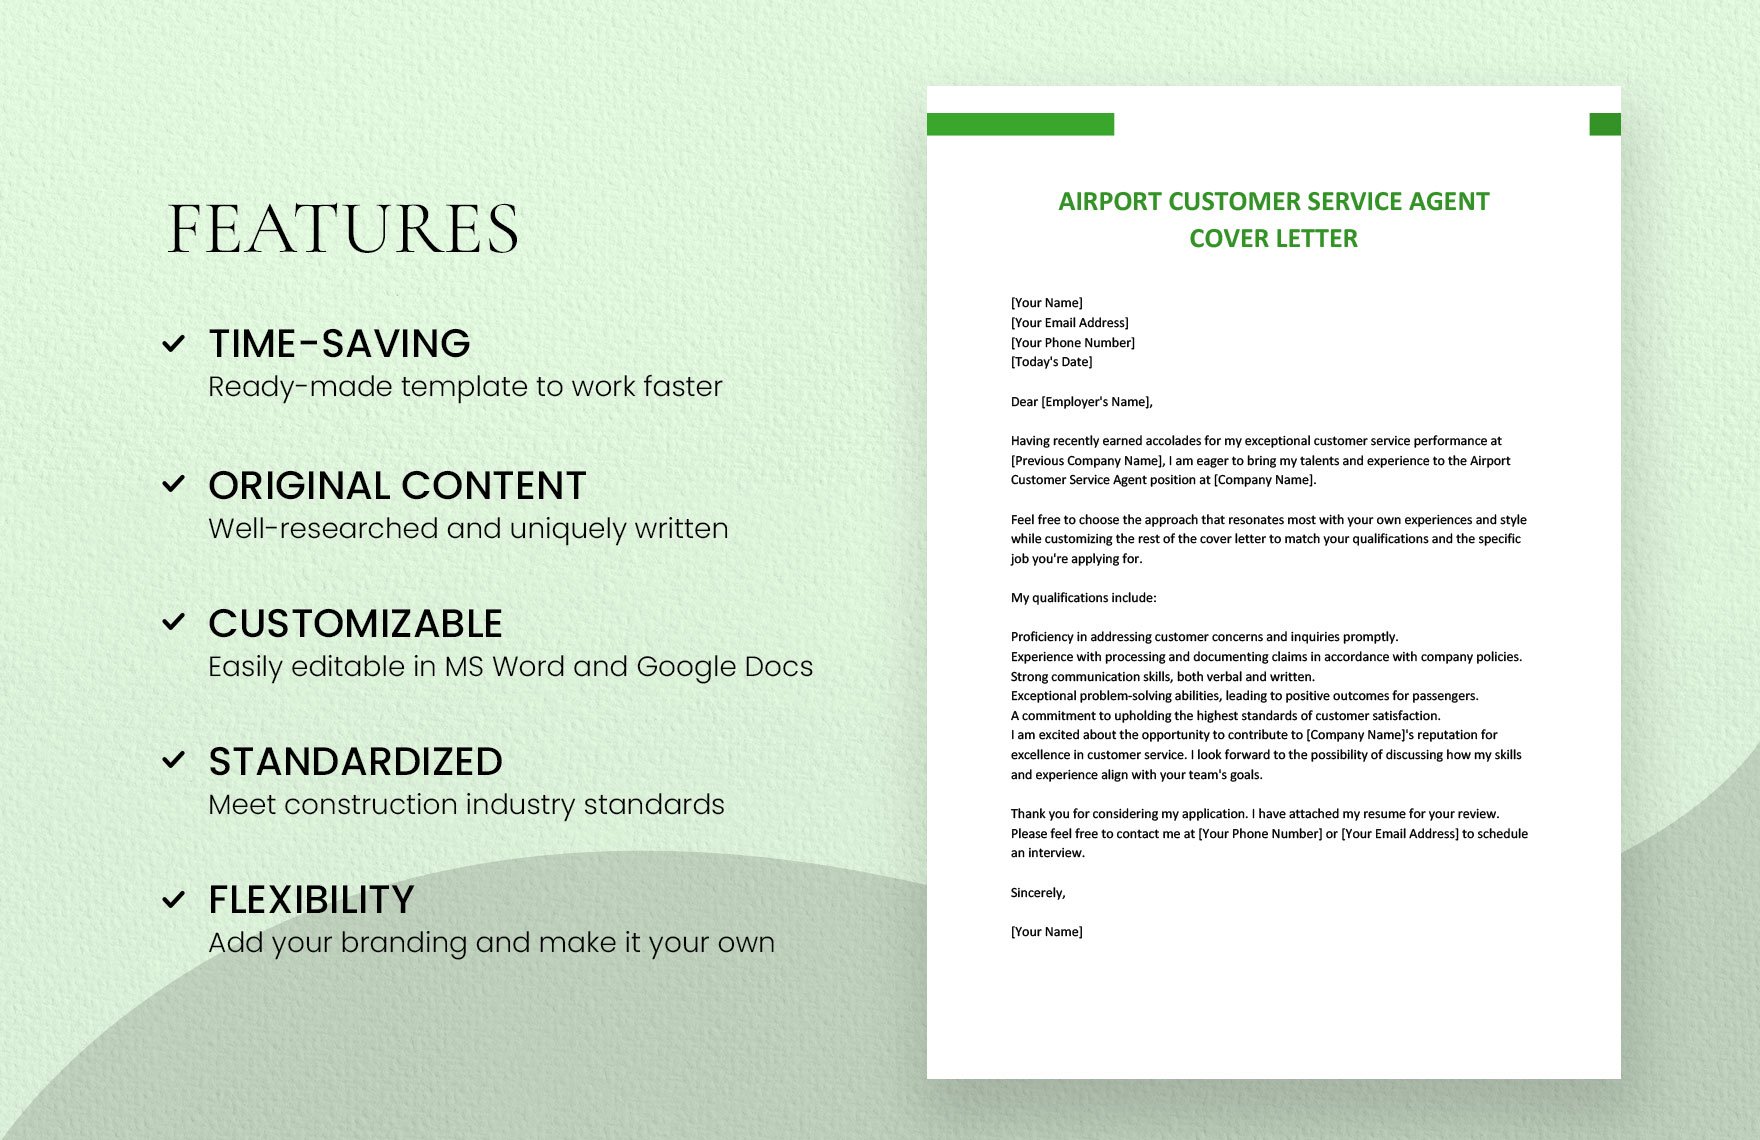 Airport Customer Service Agent Cover Letter